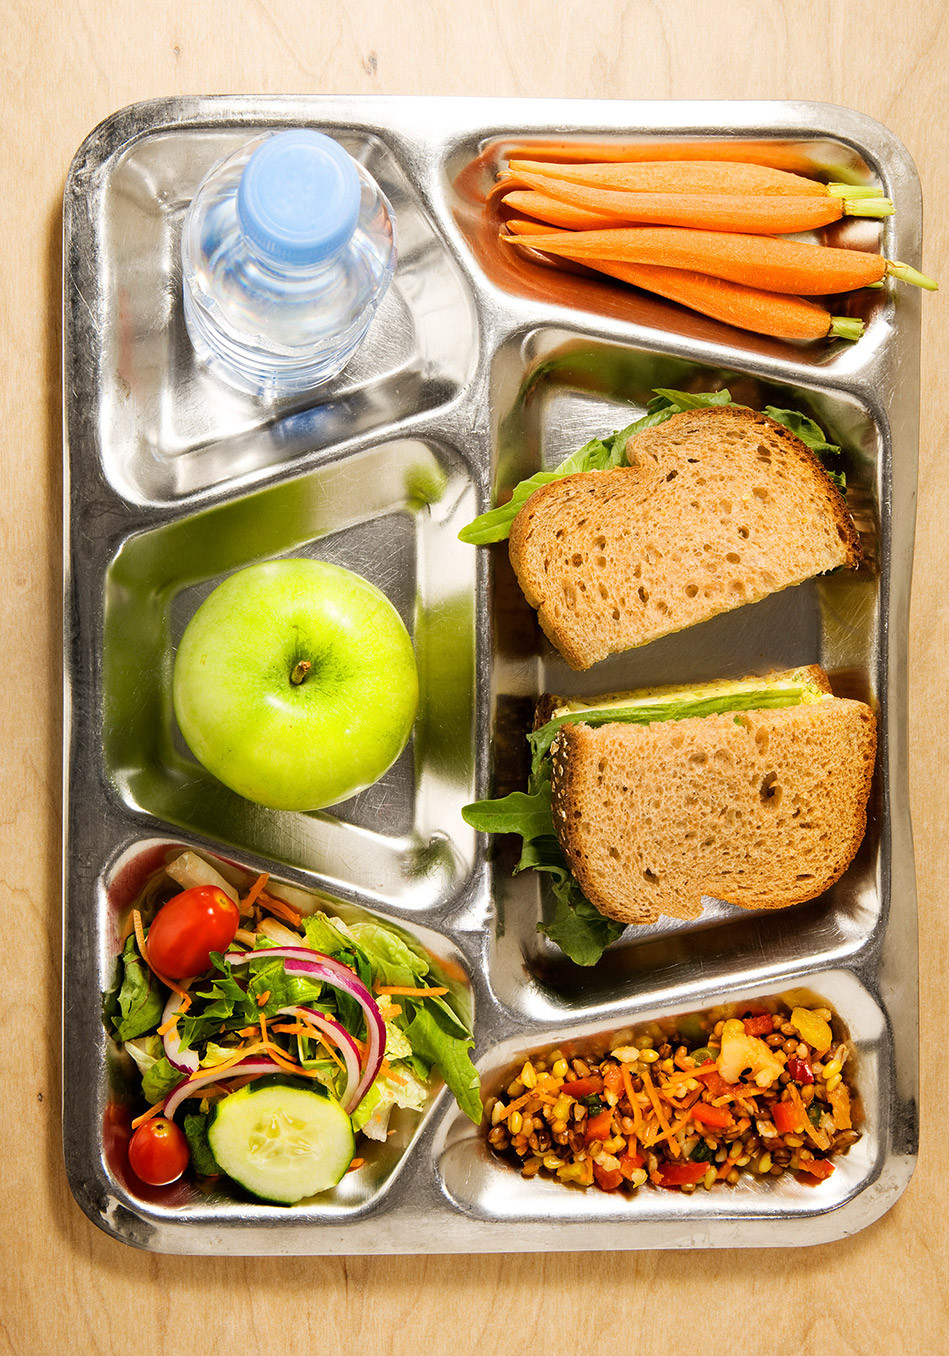 Healthy Lunches To Pack
 How to Pack a Lunch – Healthy Lunch Ideas